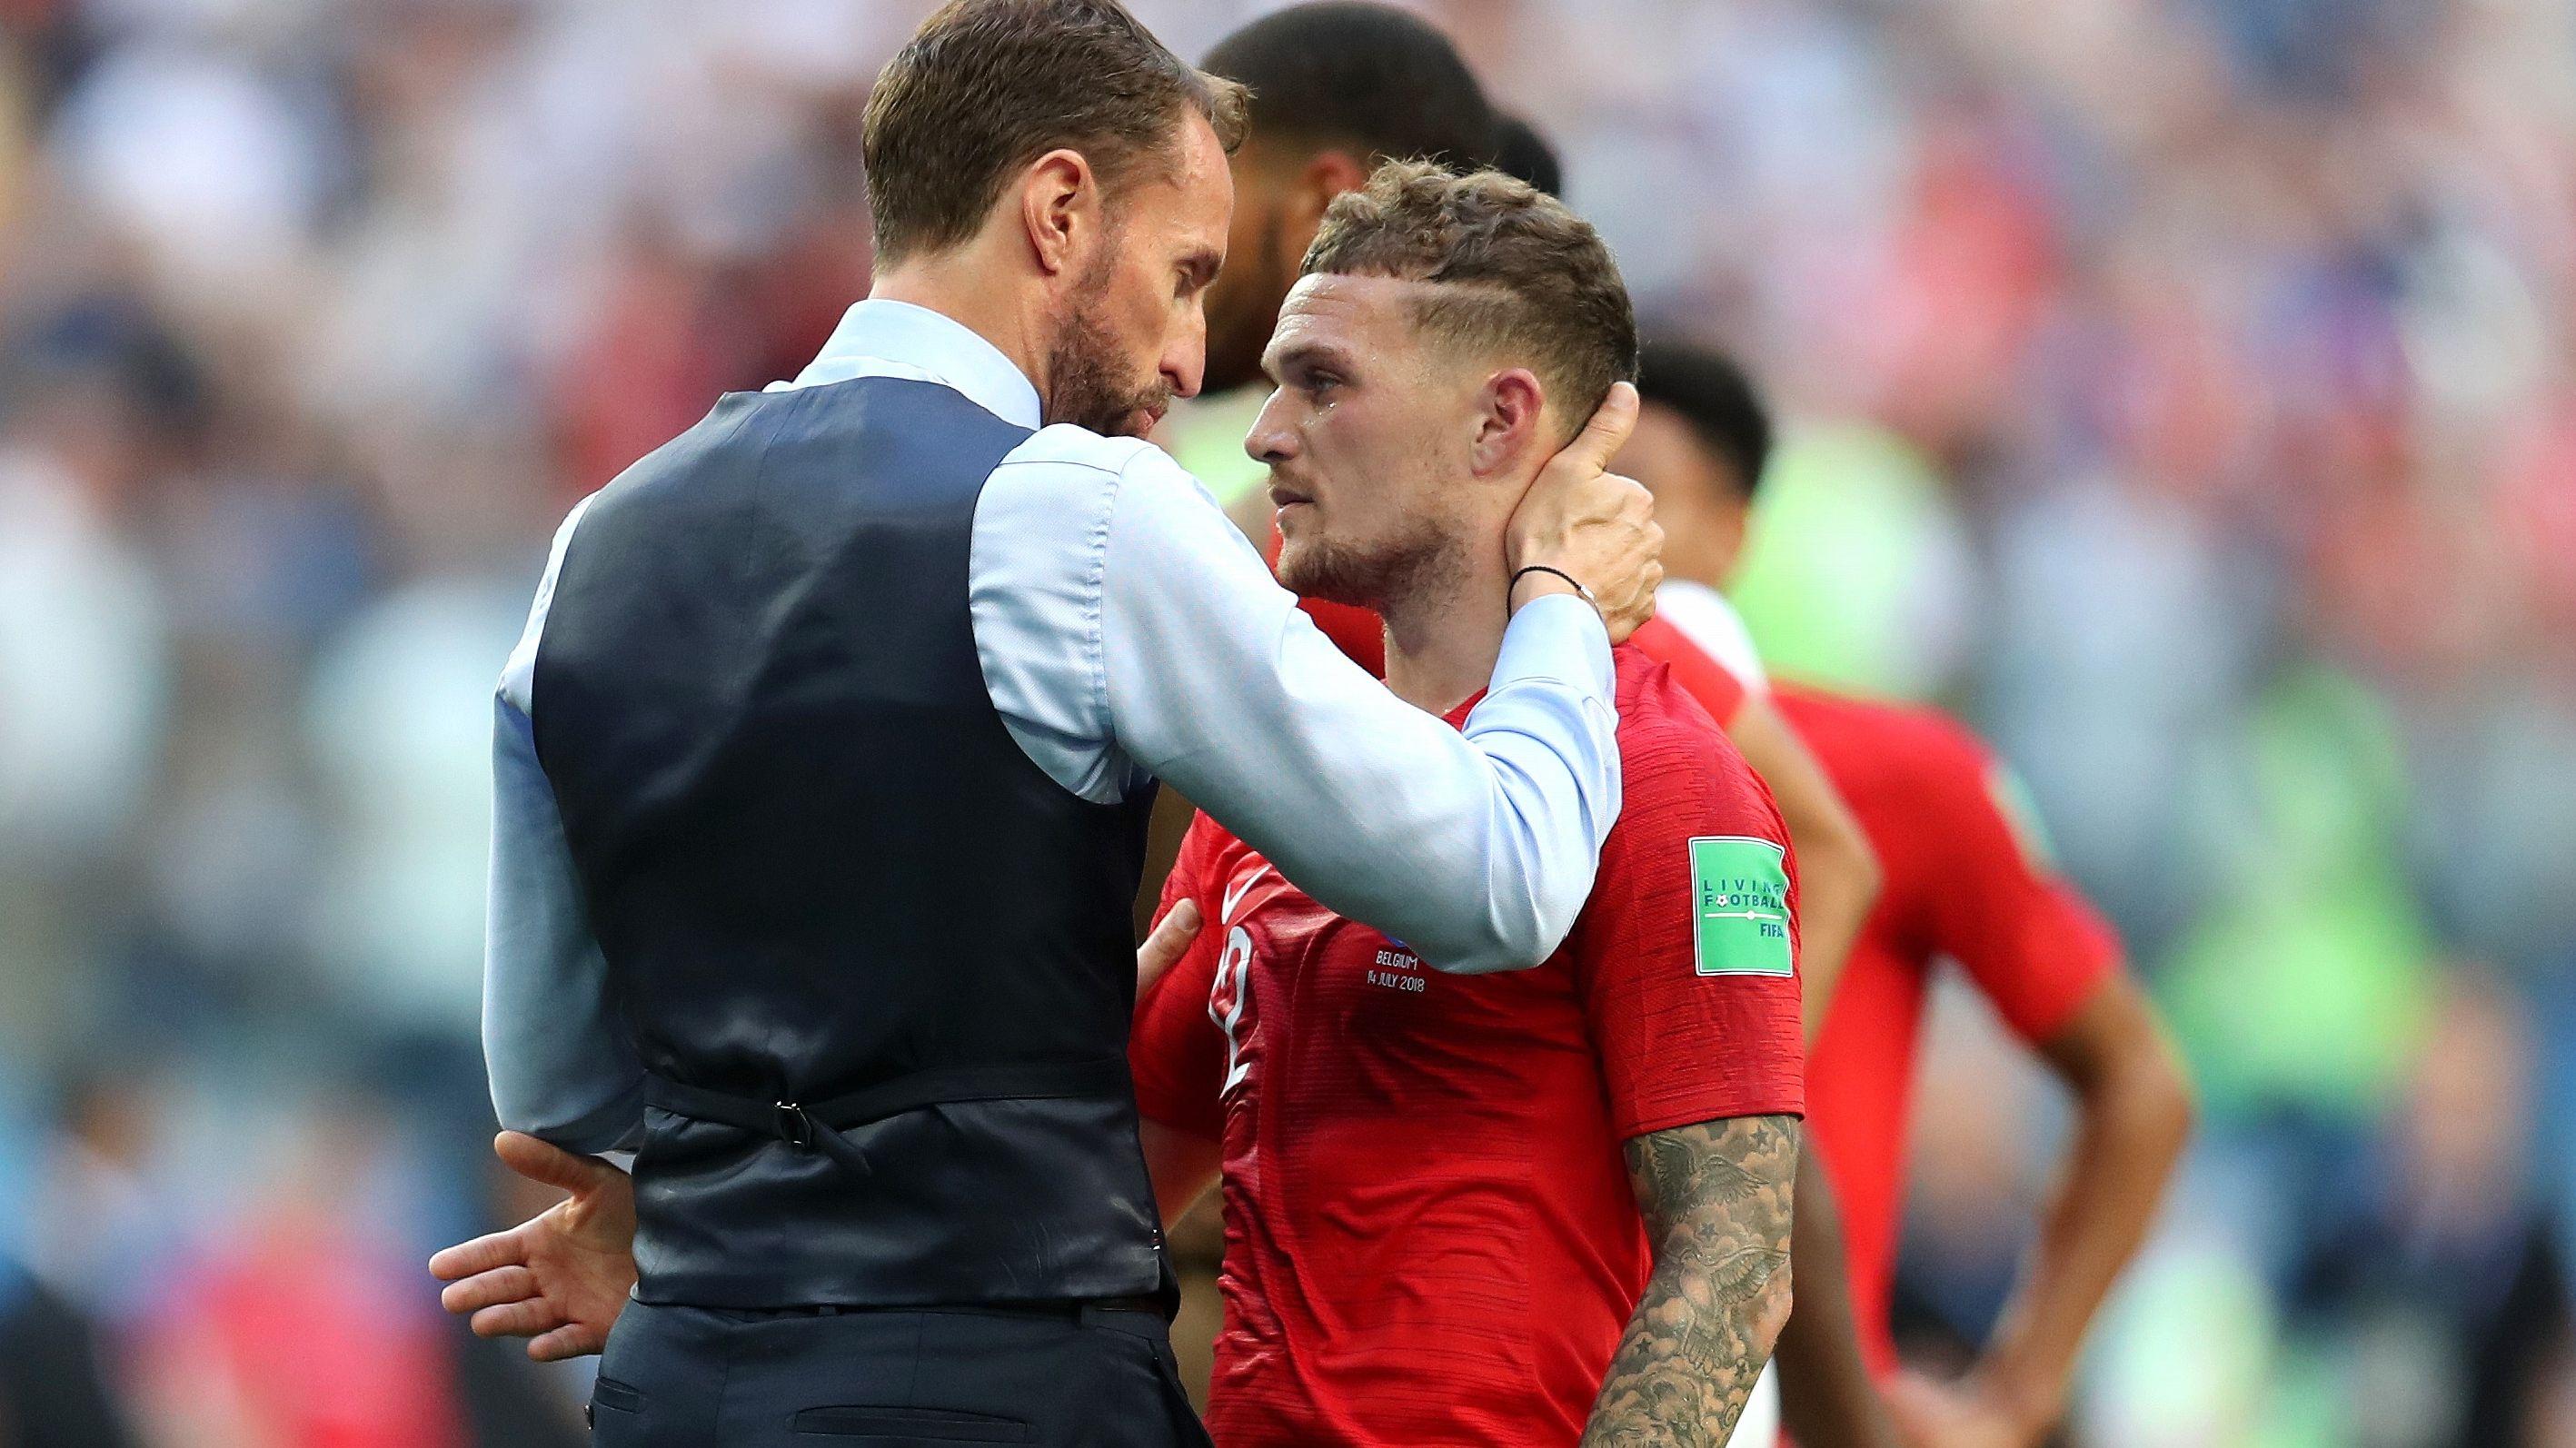 England players hoping for new Southgate deal, says Trippier